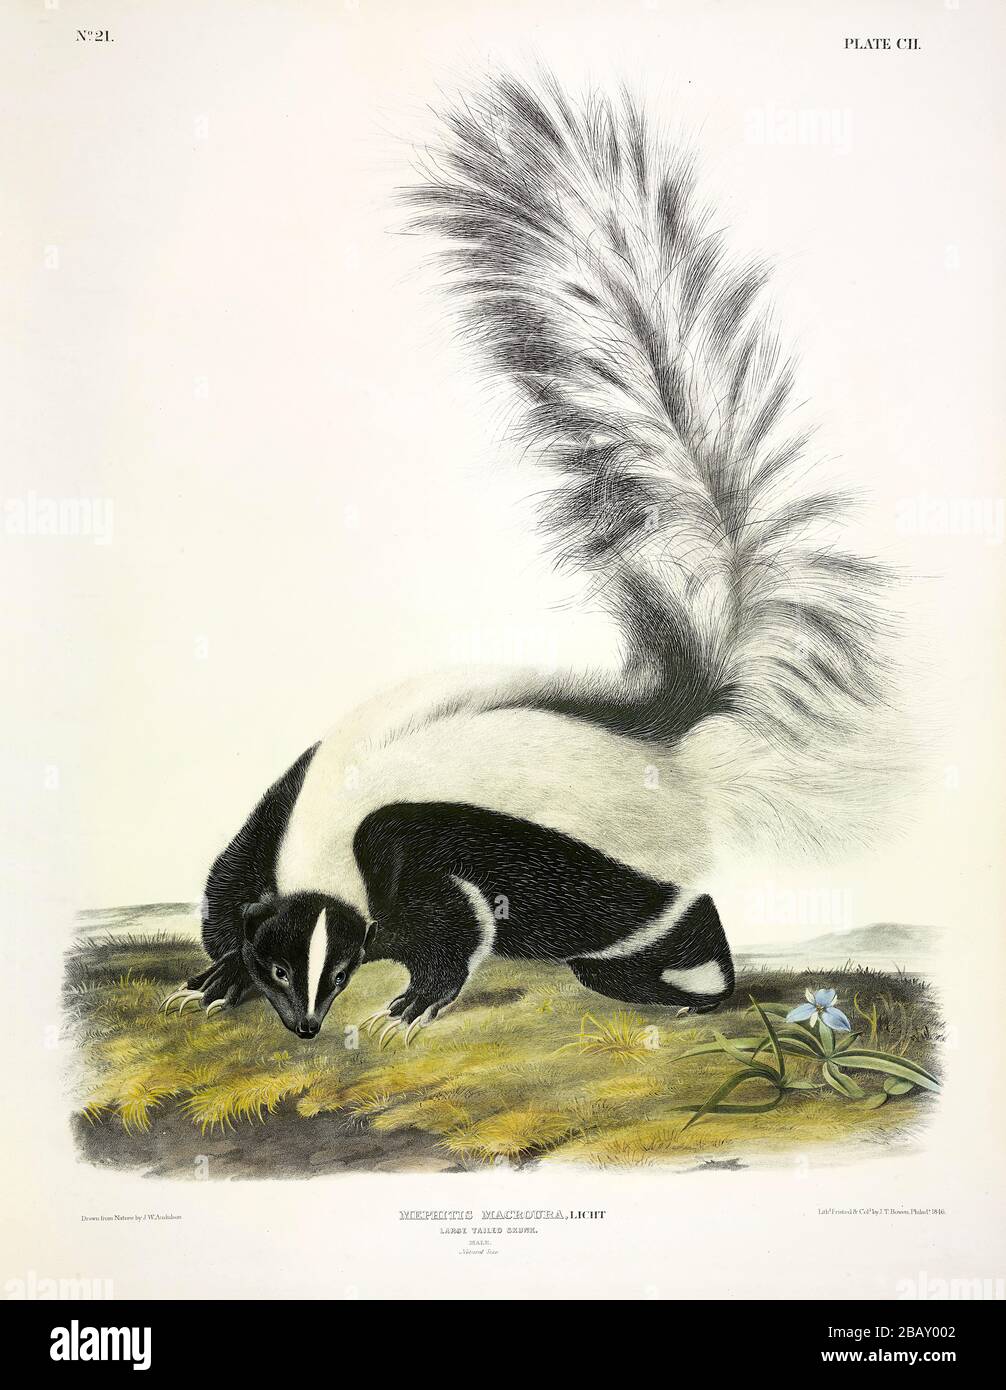 Plate 102 Large-tailed Skunk (Hooded Skunk) The Viviparous Quadrupeds of North America, John James Audubon, Very high resolution and quality image Stock Photo